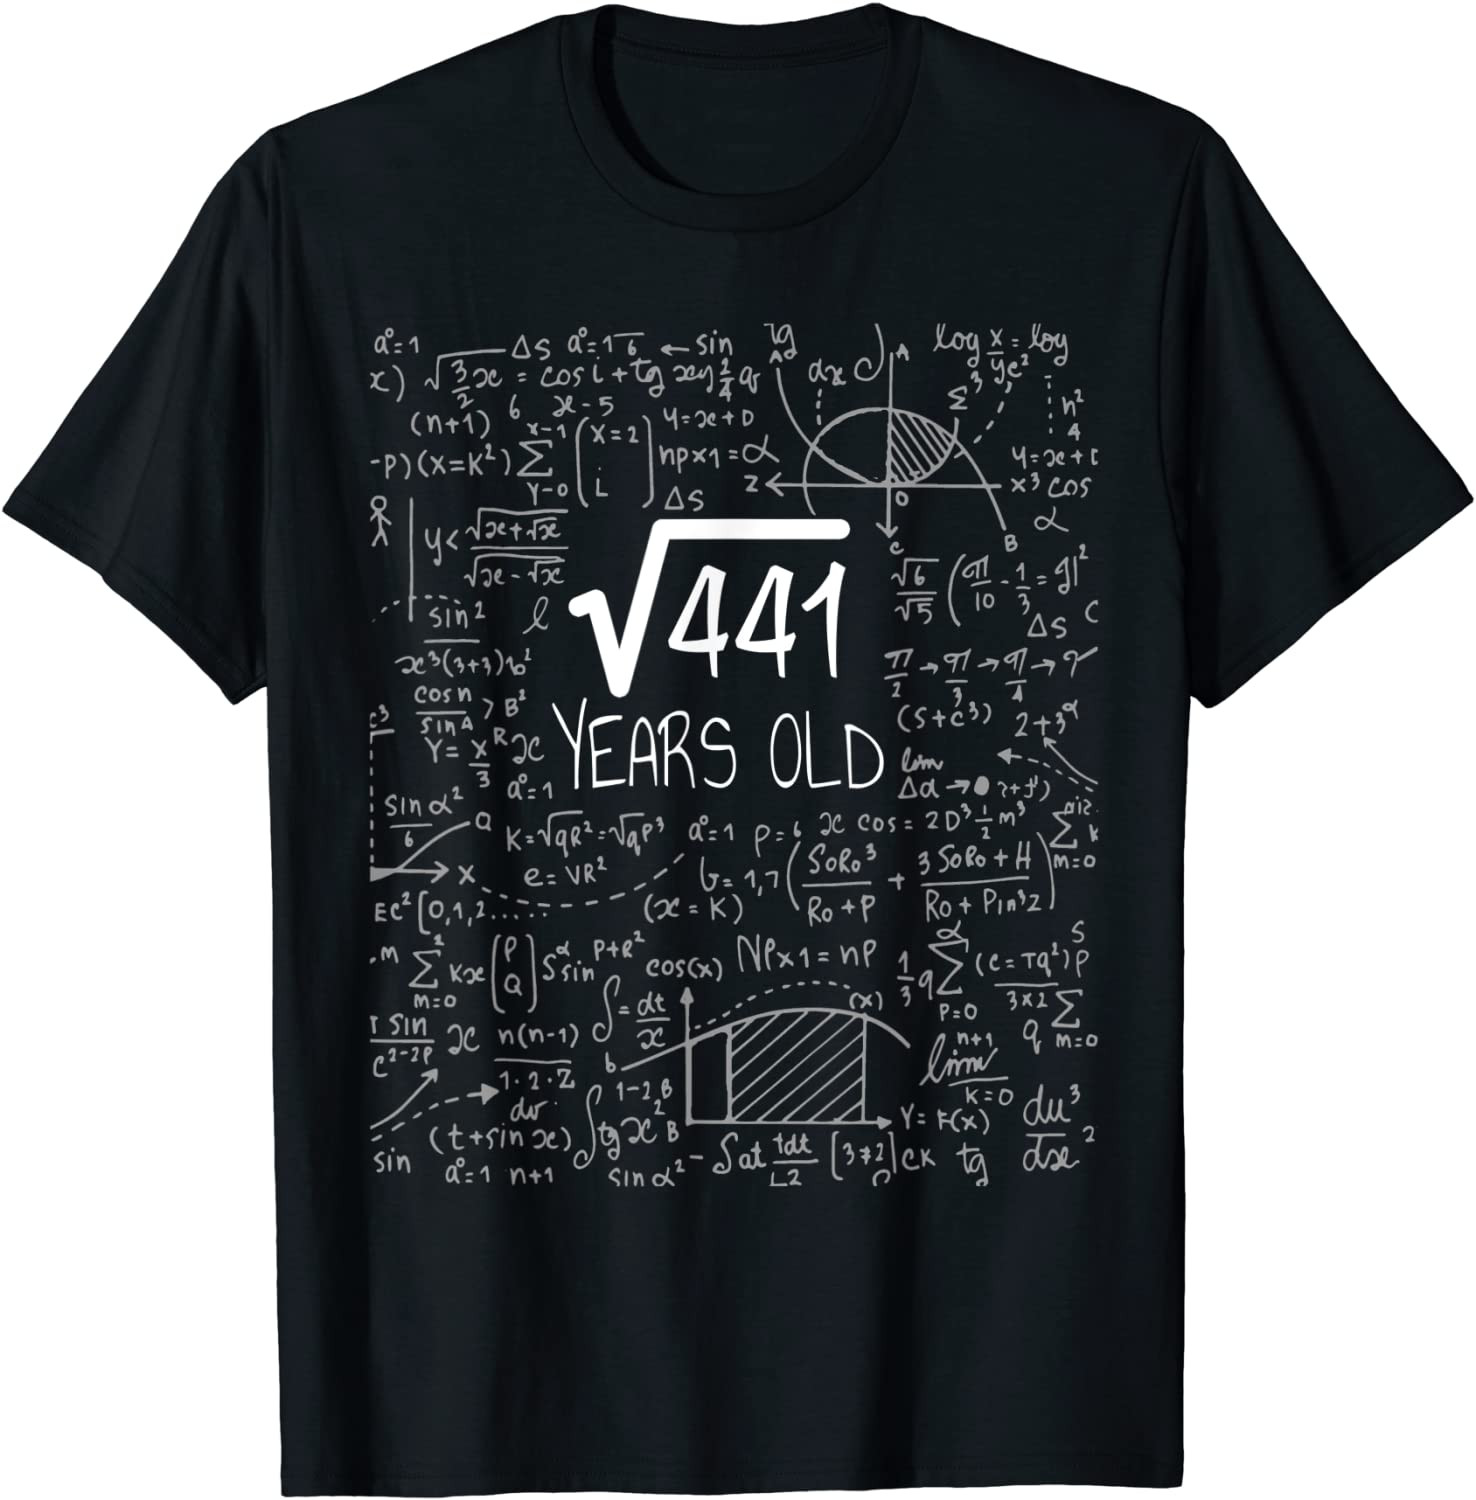 Square Root Of 441: 21 Years Old, 21st Birthday Design